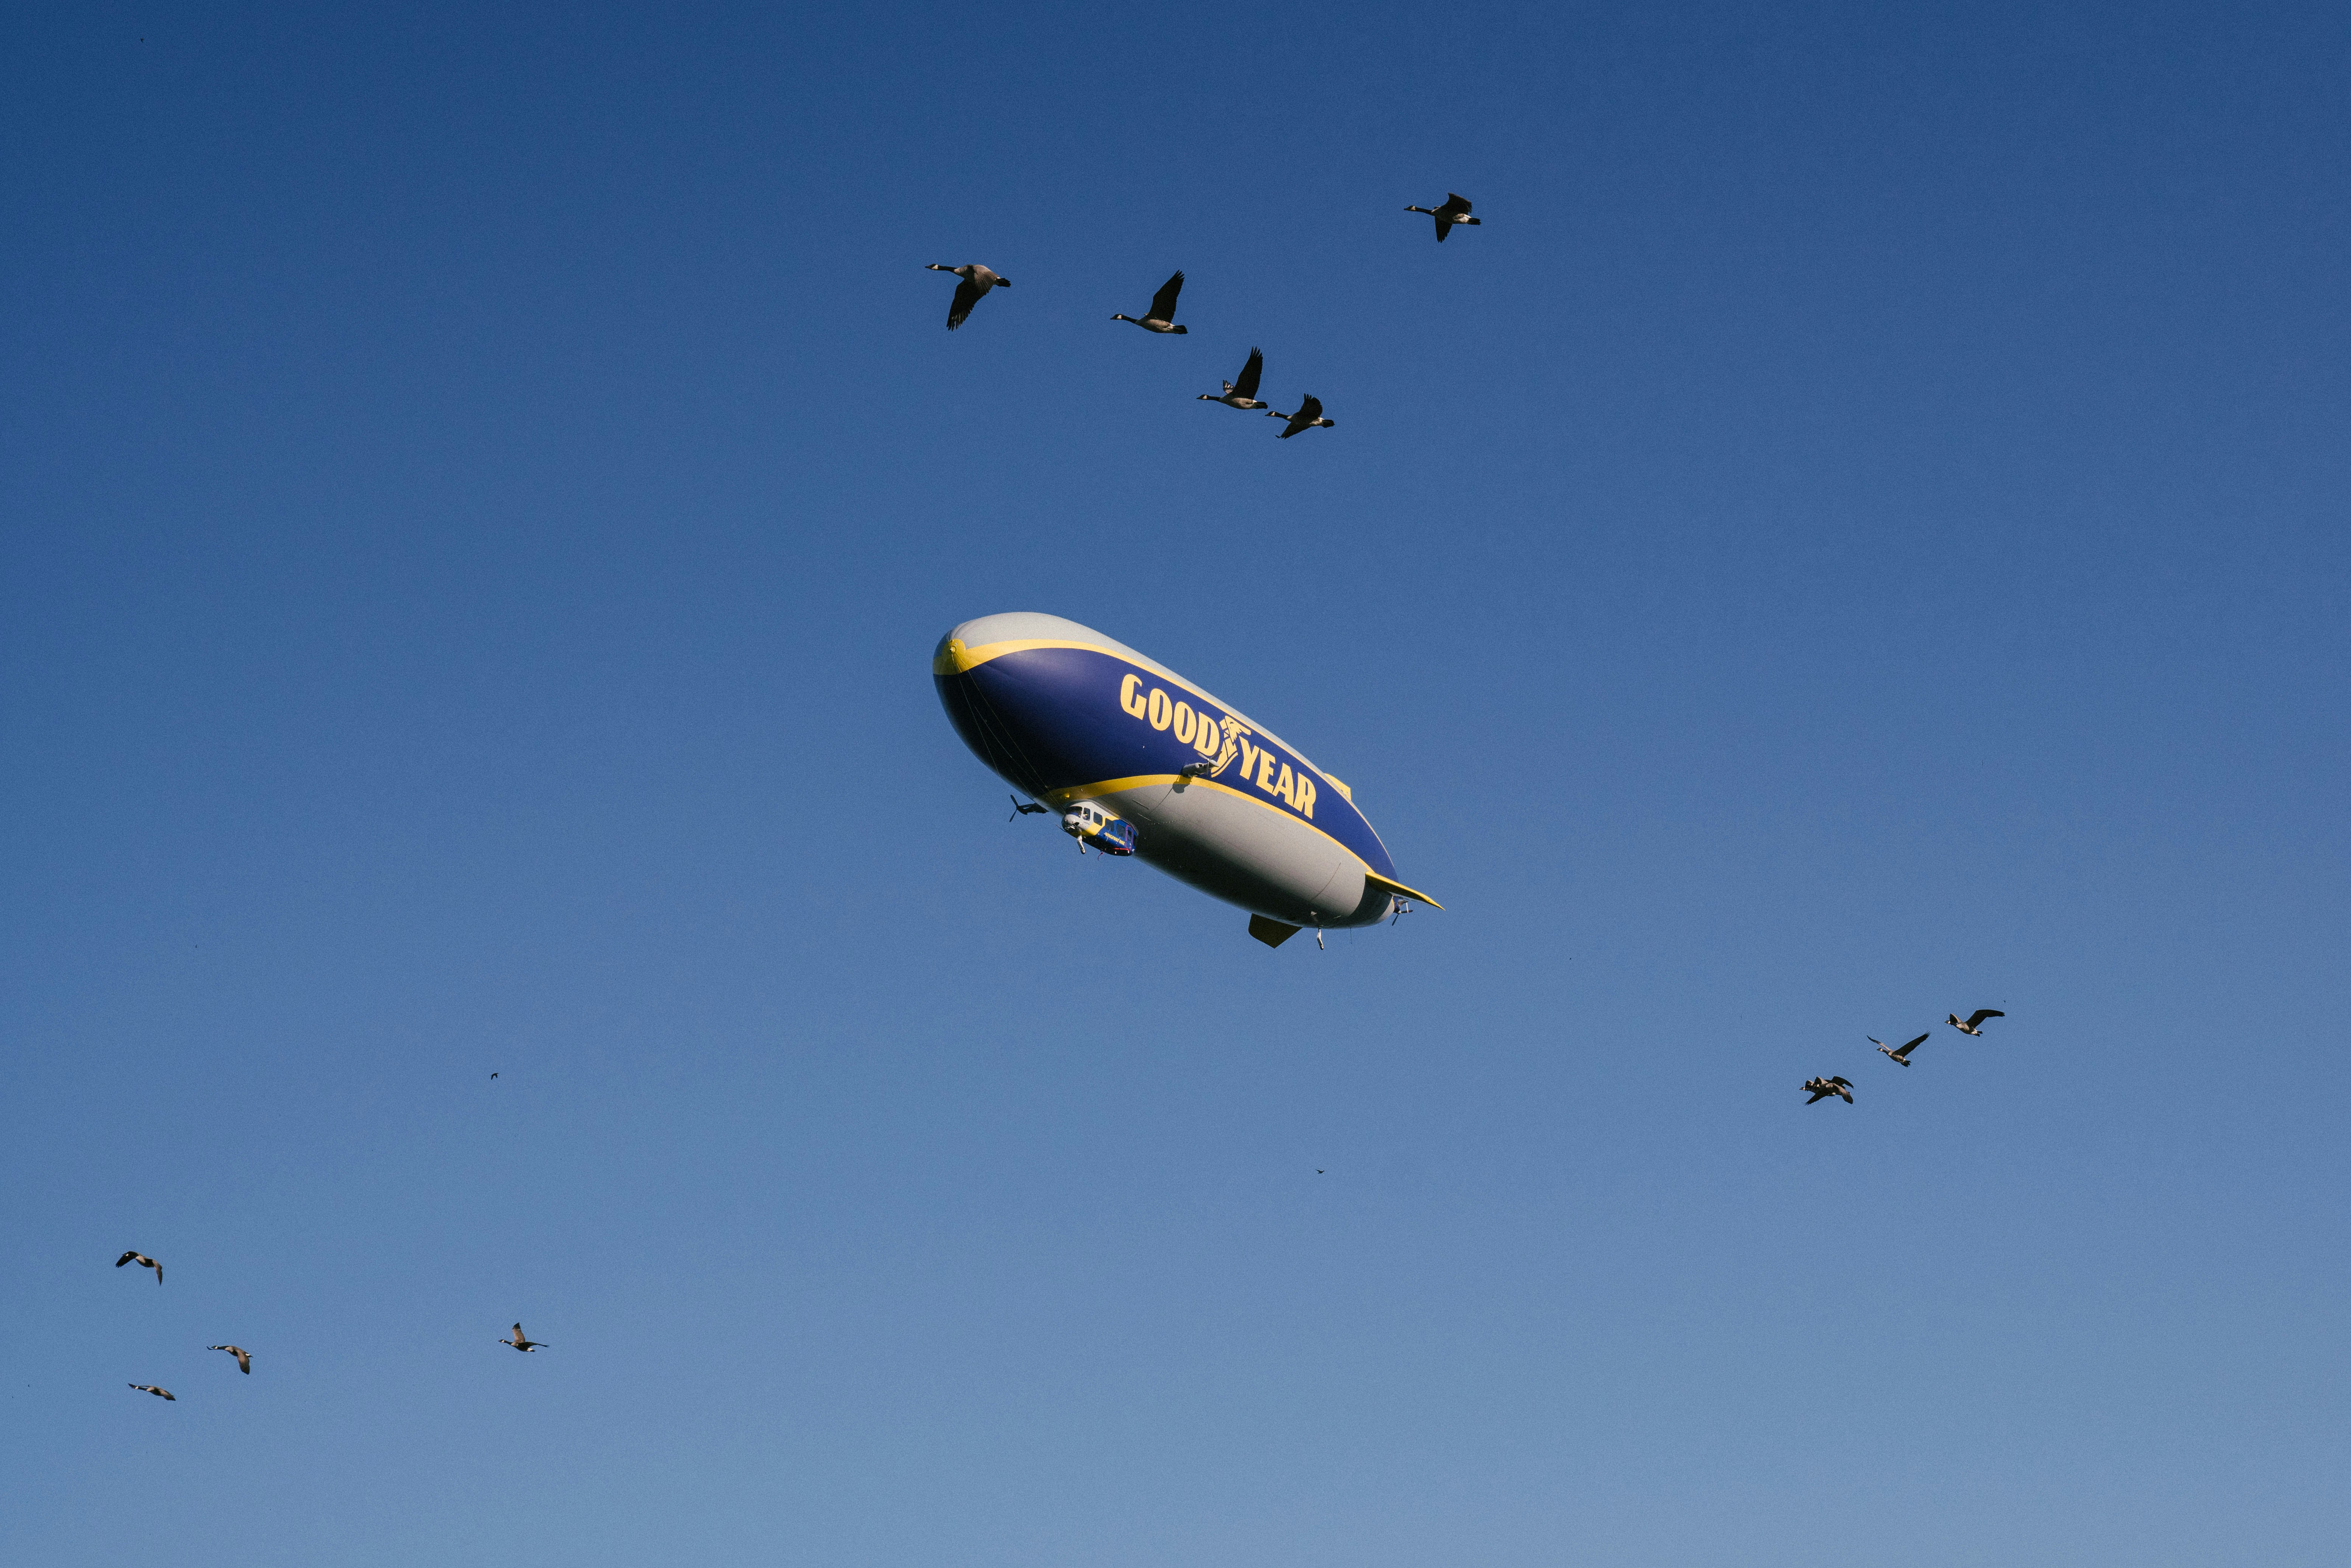 The famous Goodyear Blimp in a cloudless sky